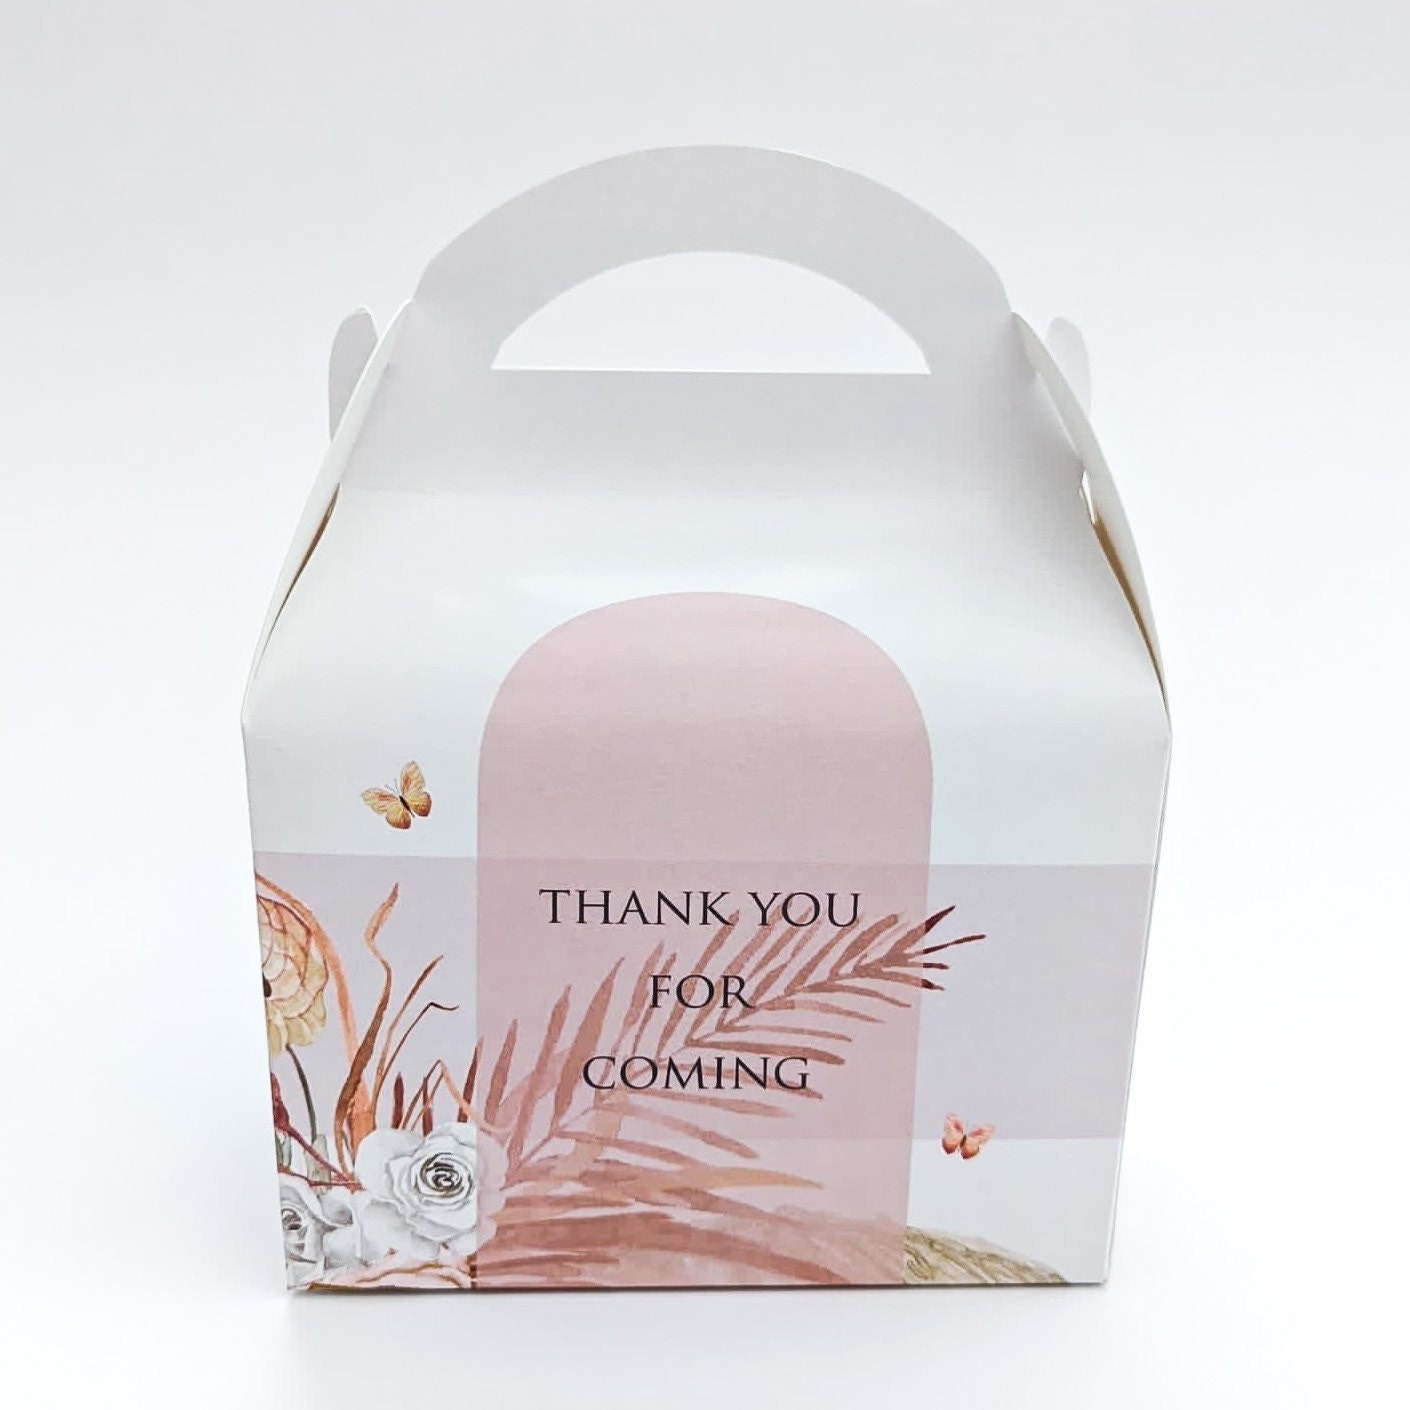 Watercolour boho floral  Personalised Children’s Party Box Gift Bag Favour